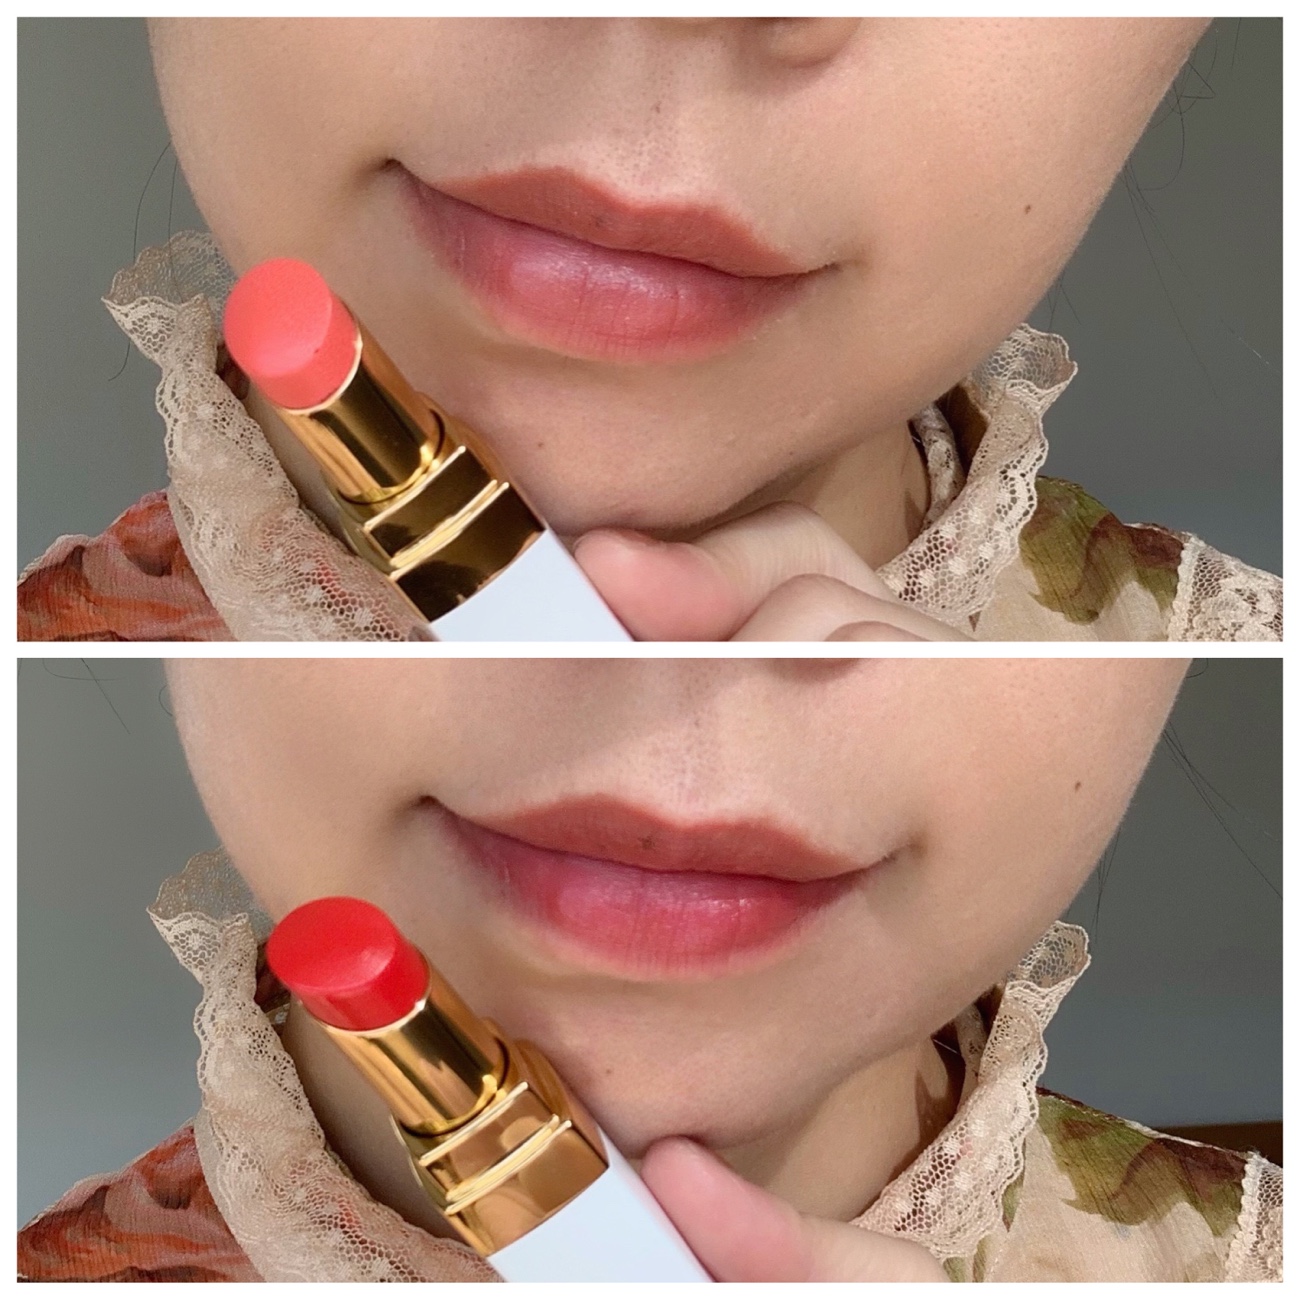 Chanel Coco Gloss: My love for Gloss is back! + Chanel Tweed Coral blush  review — Survivorpeach